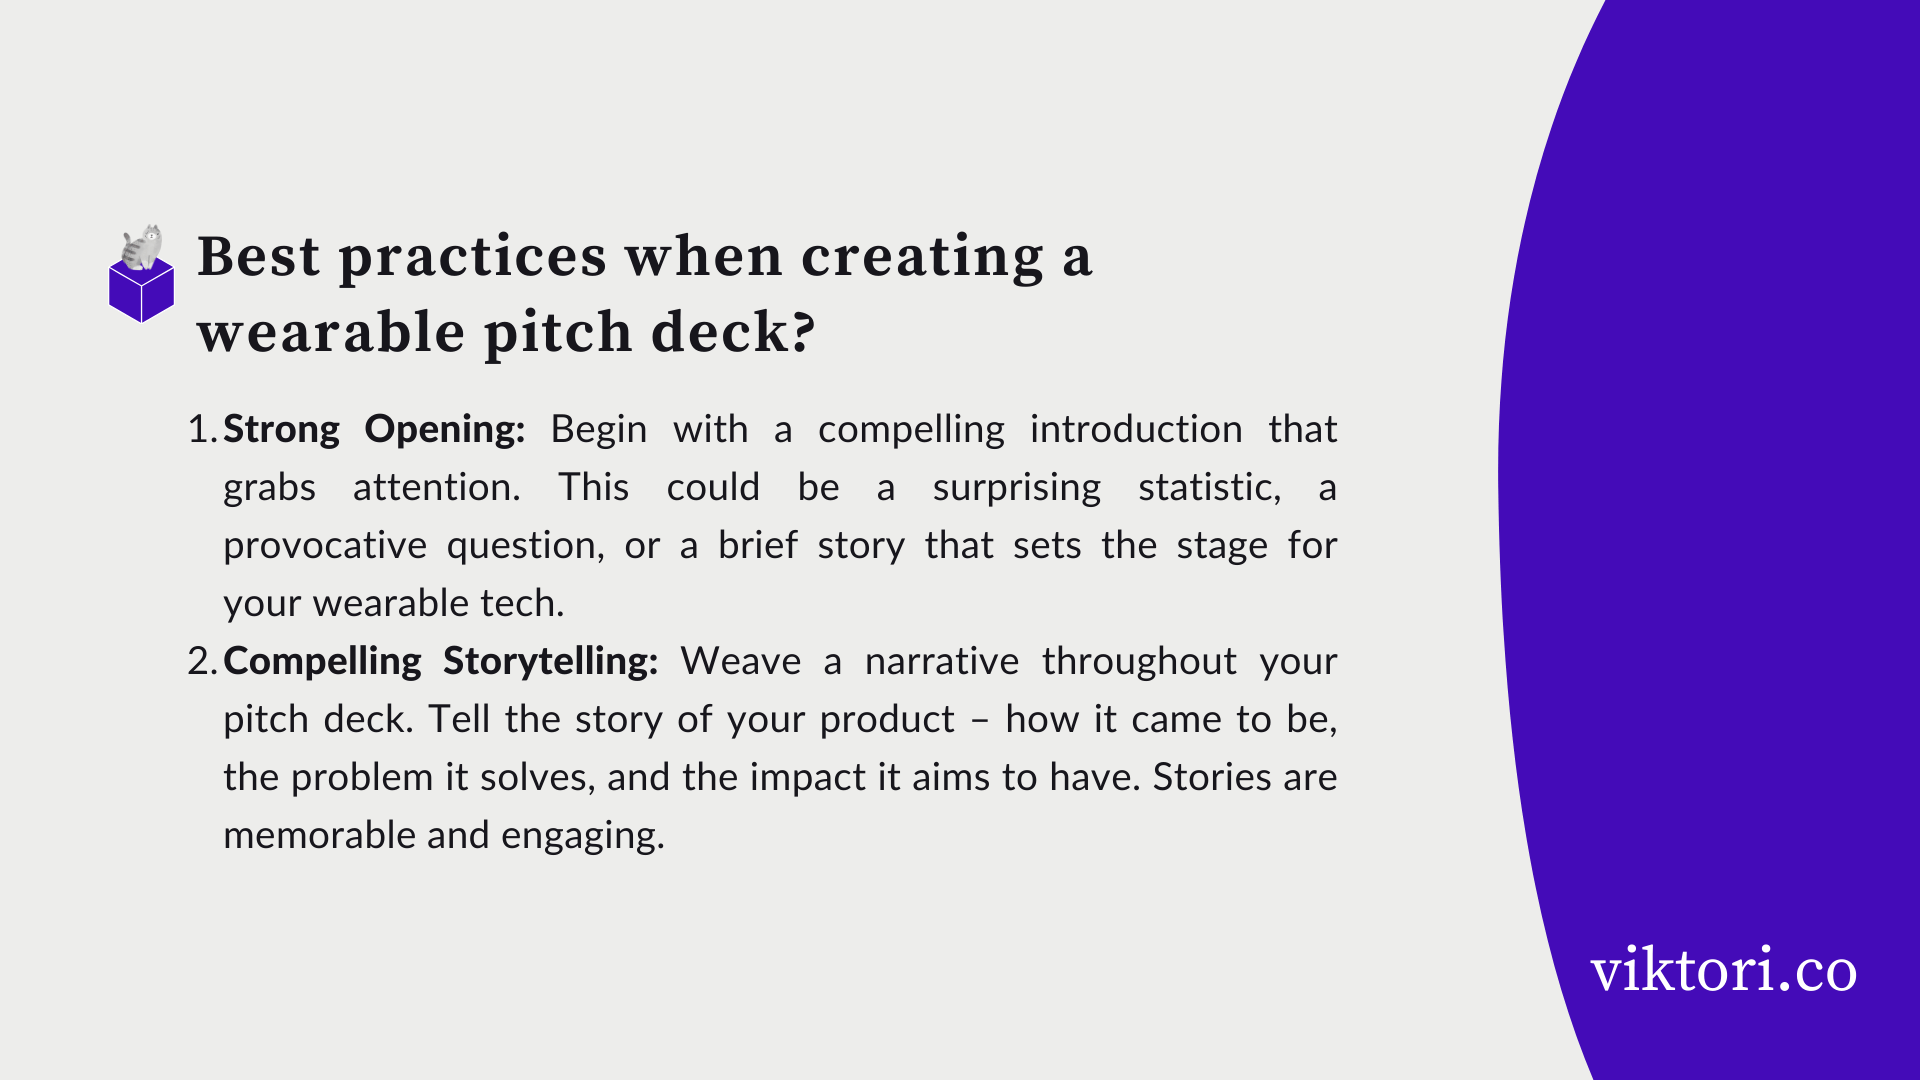 wearable pitch deck guide: 2 best practices